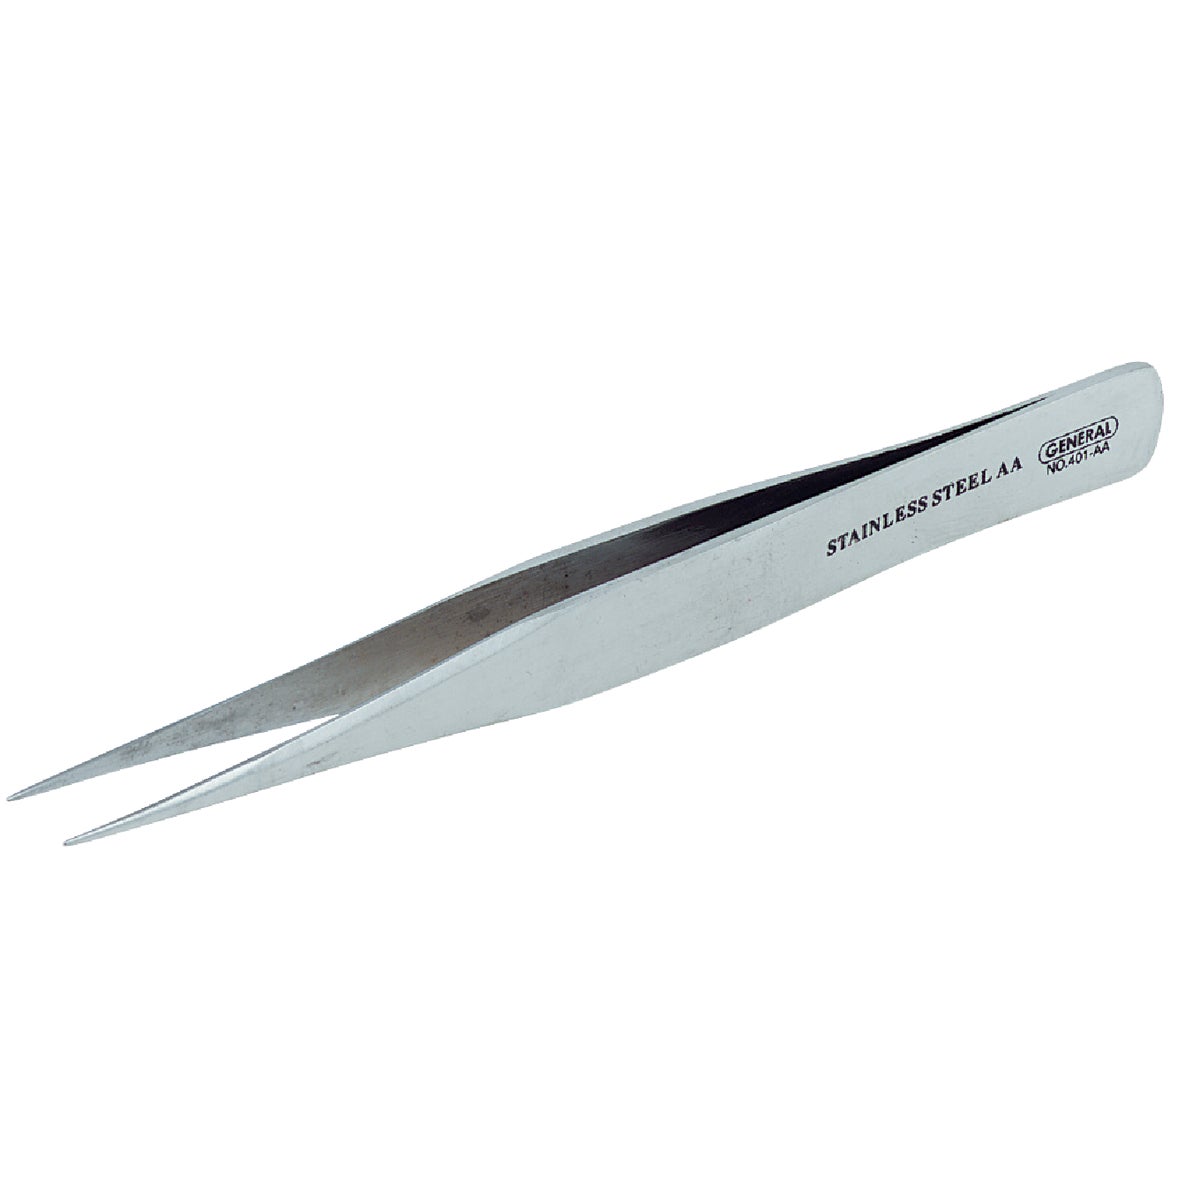 Item 319007, 5" long. Strong bevel point.